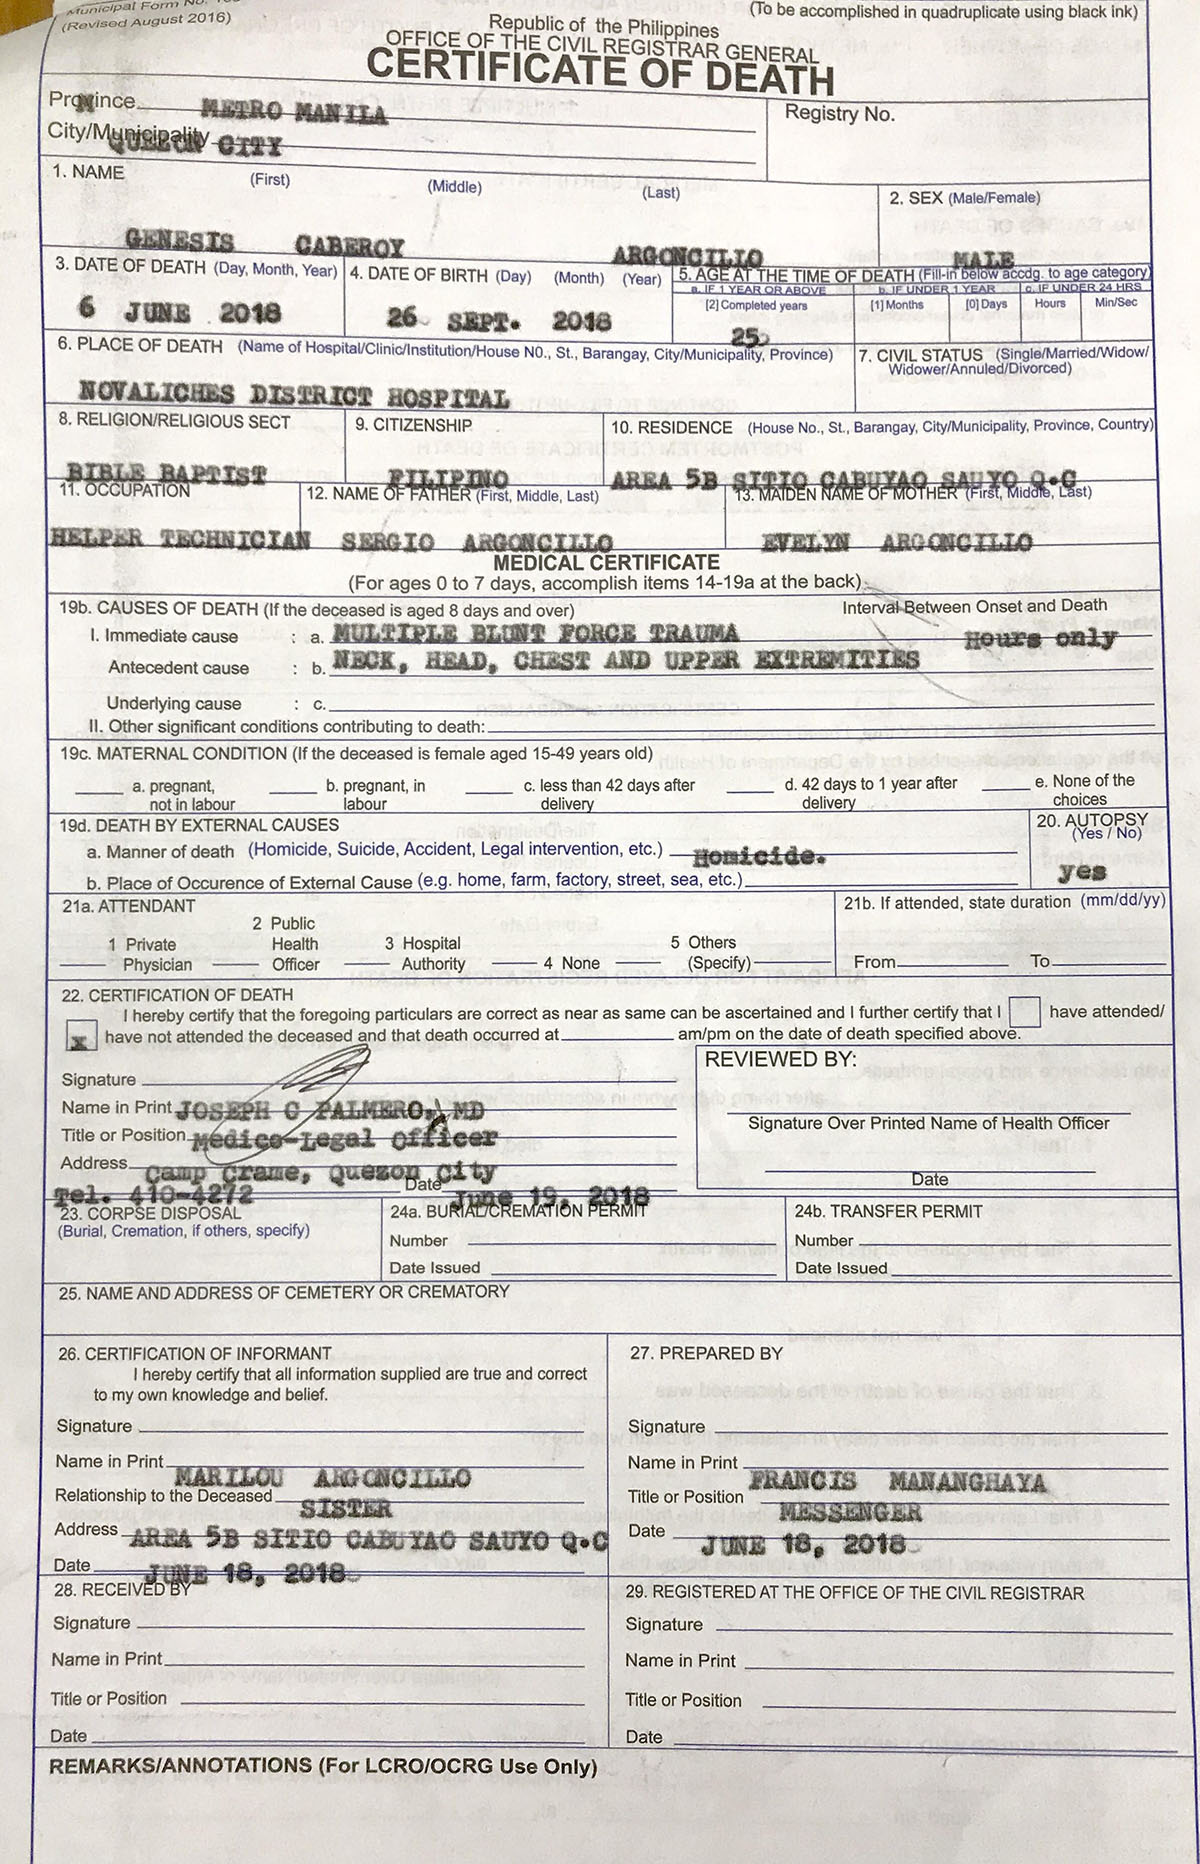 DEATH CERTIFICATE. No less than the PNP's medico-legal chief says Genesis 'Tisoy' Argoncillo was beaten to death. Sourced photo  